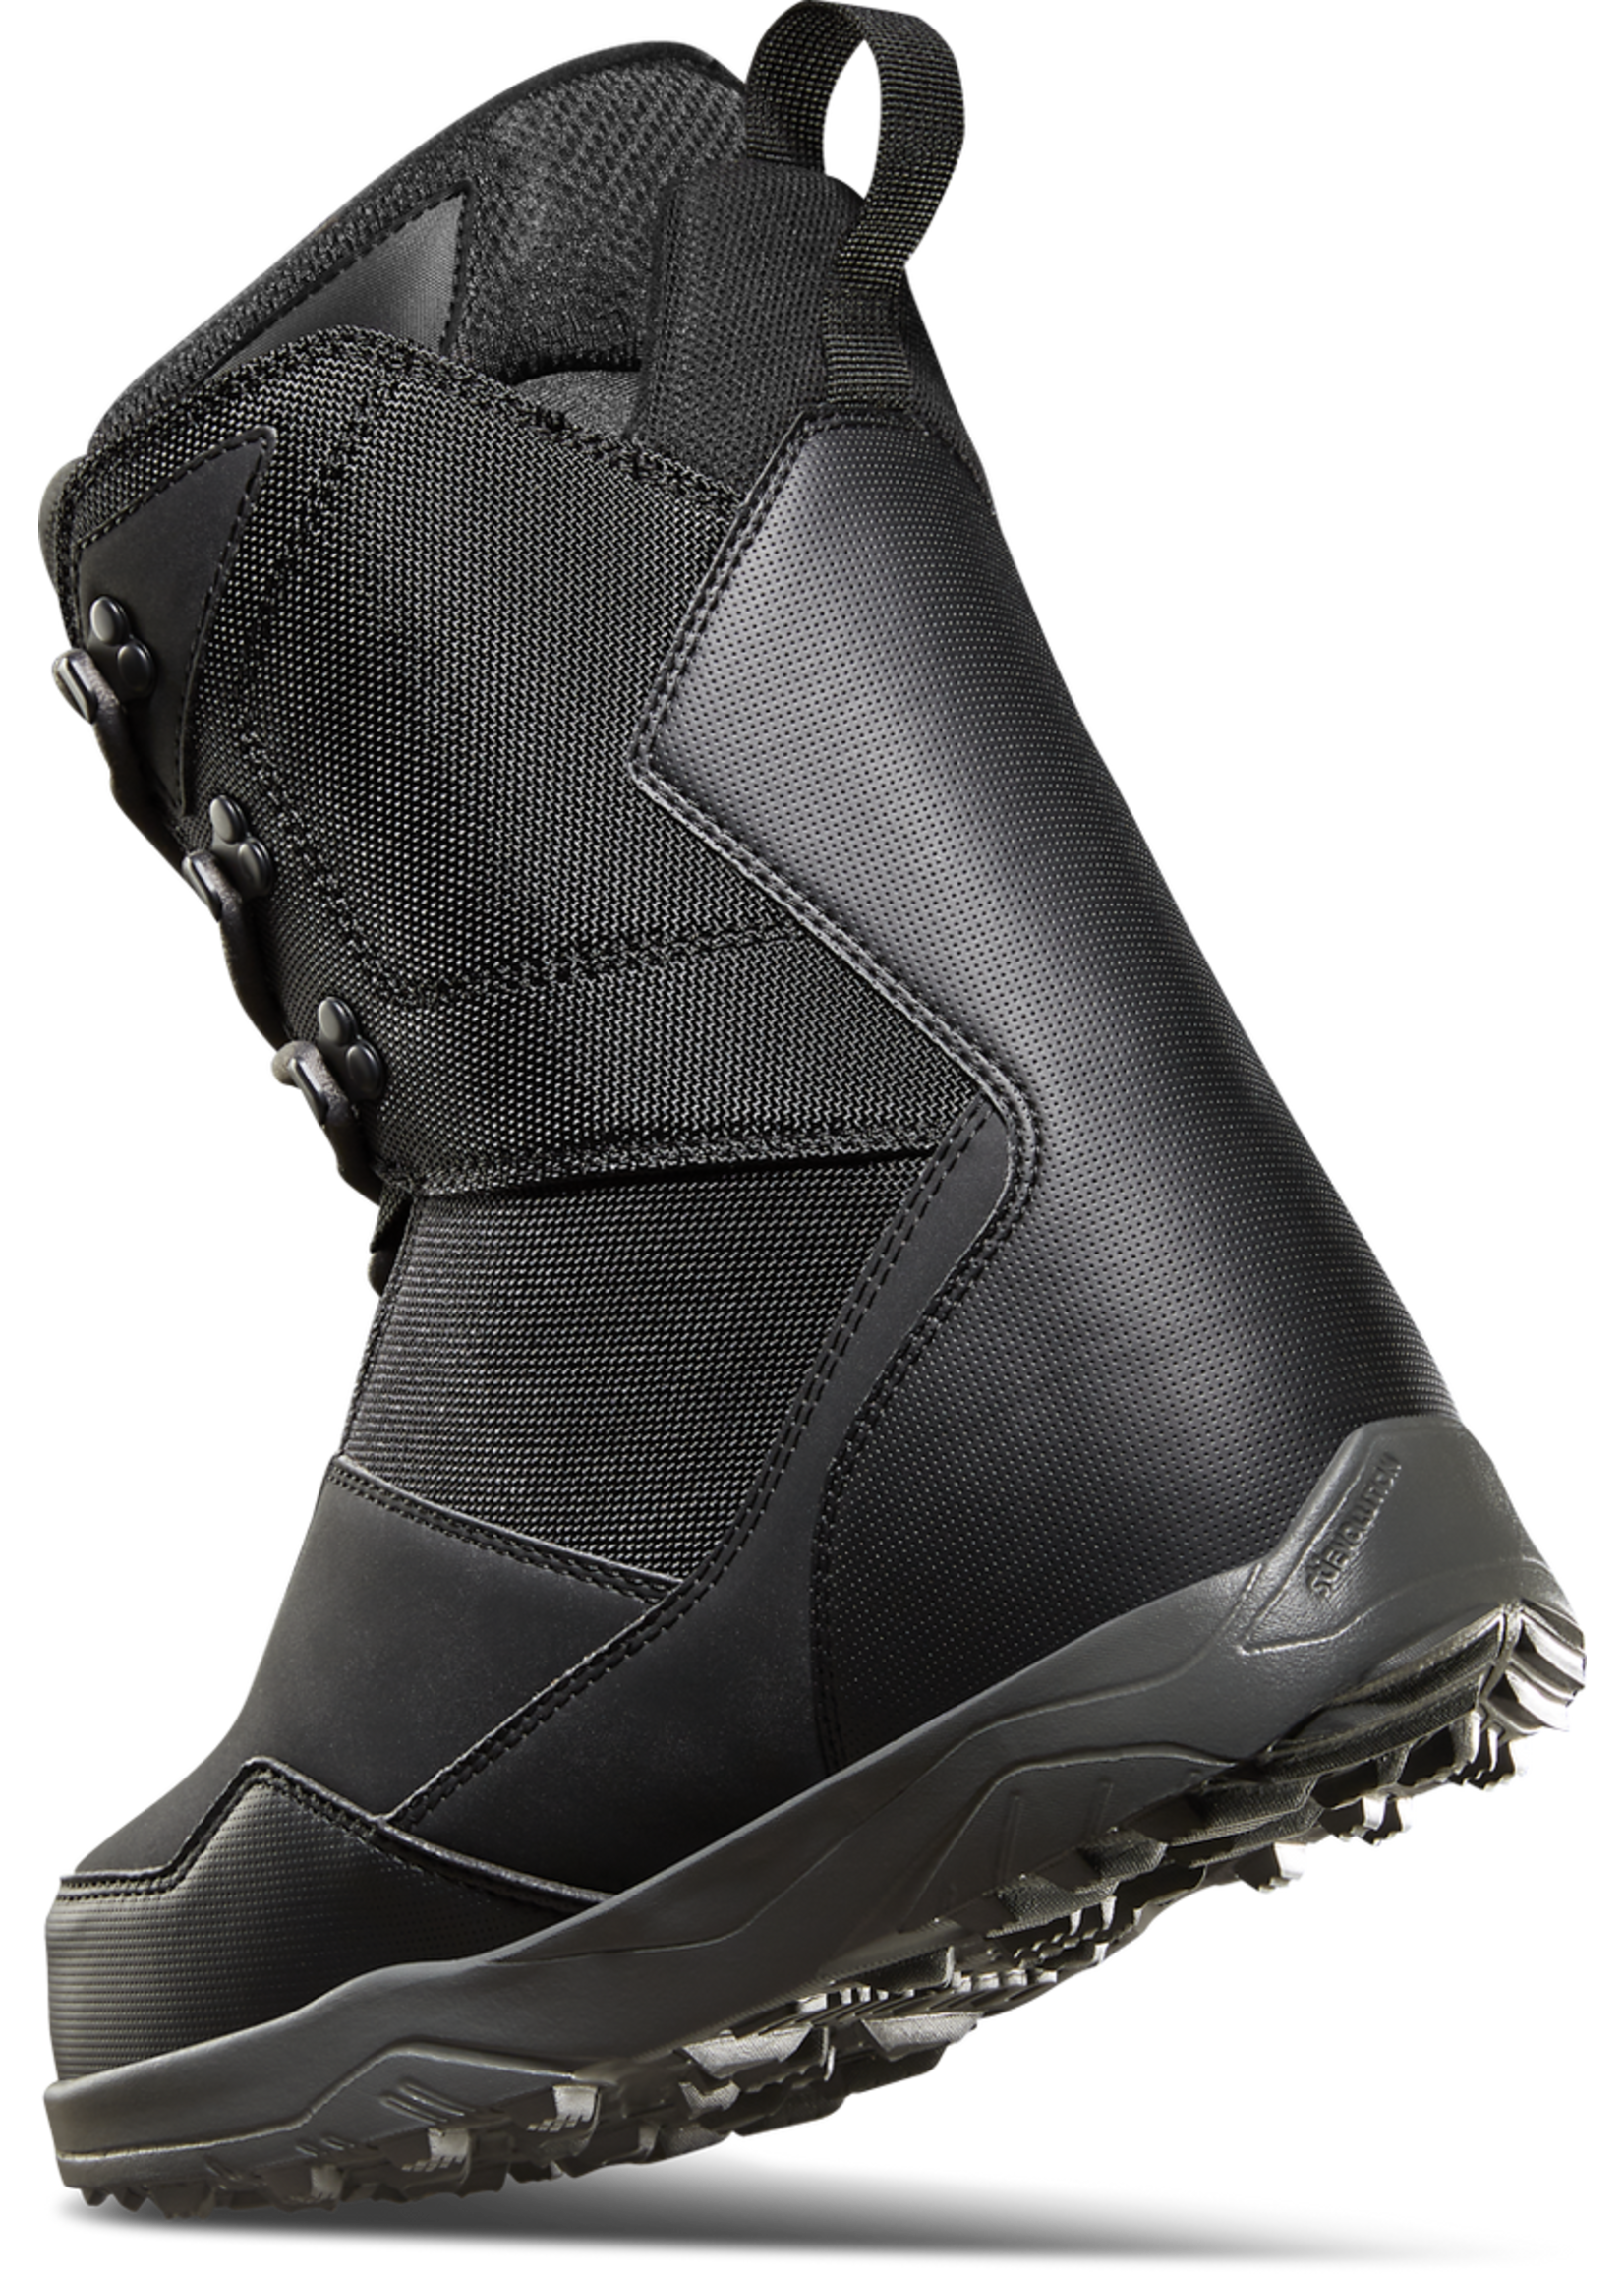 ThirtyTwo SHIFTY BOOT W23